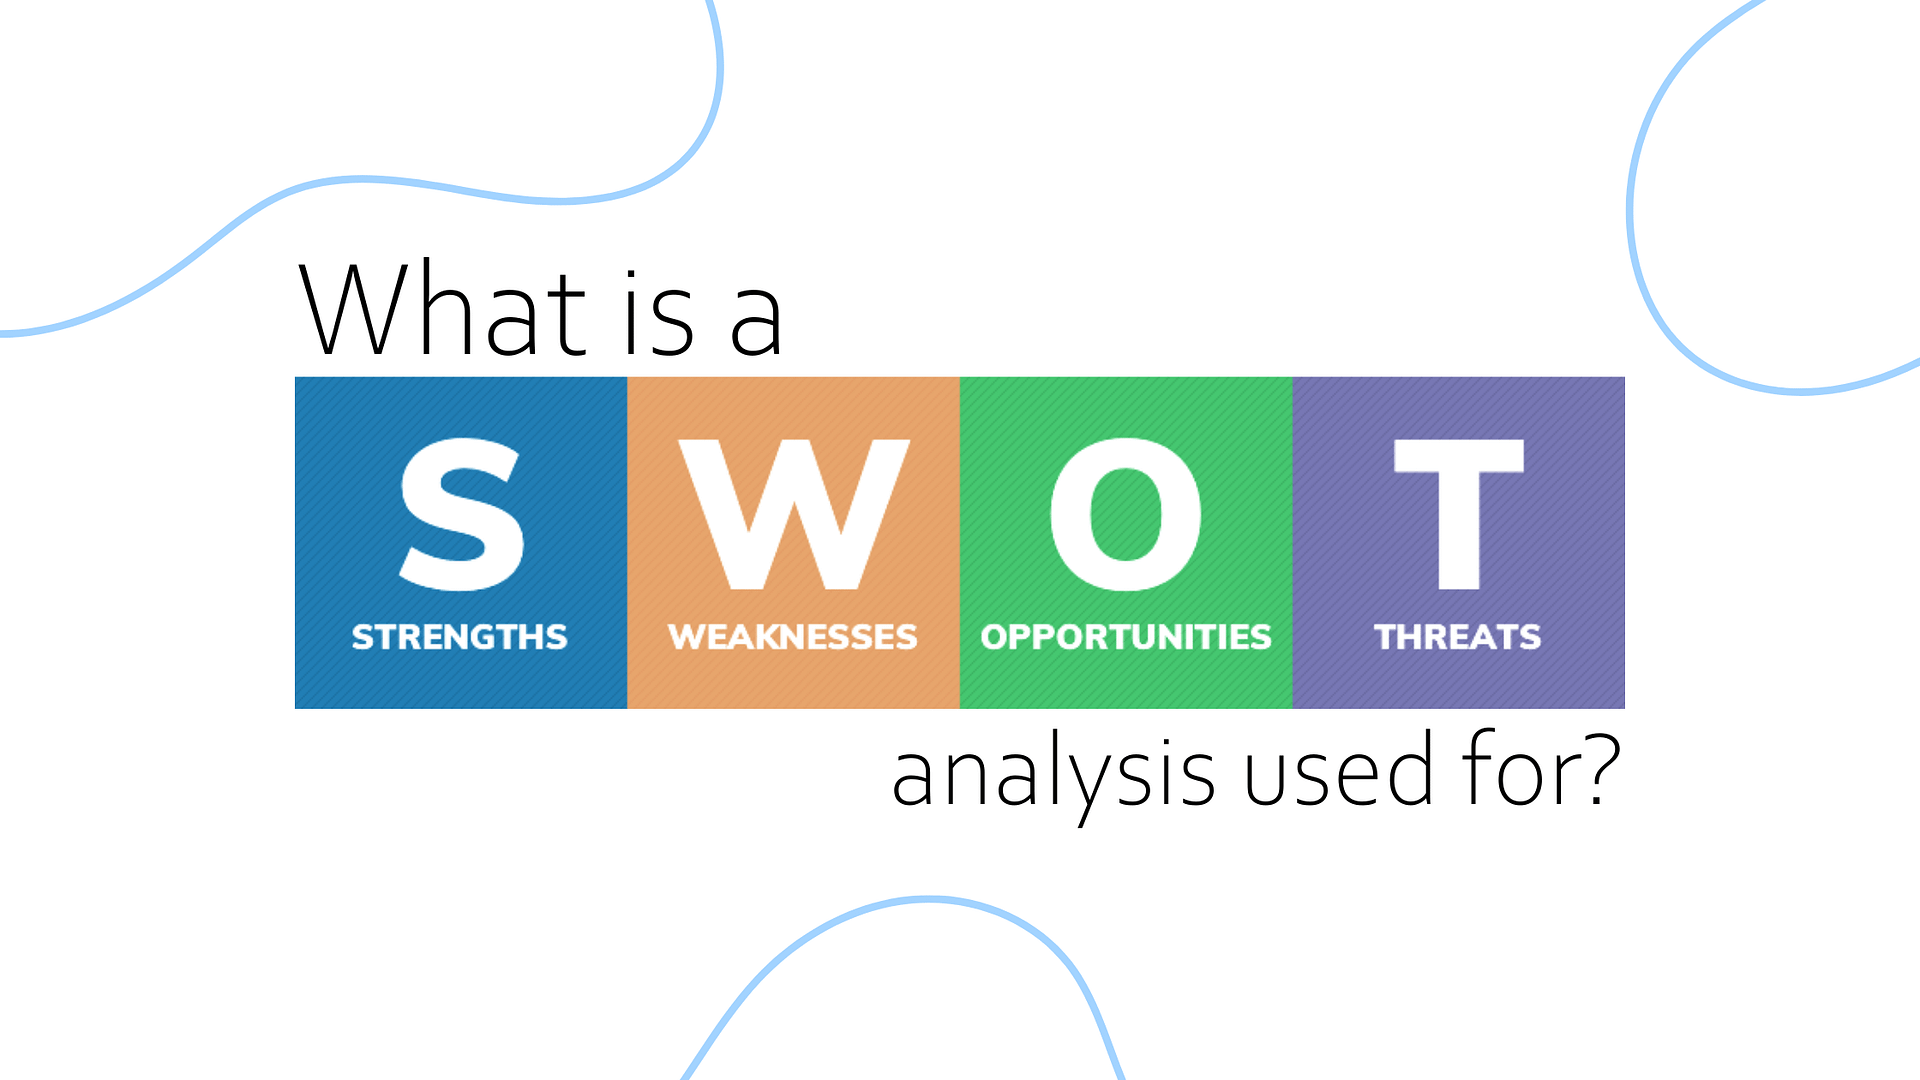 What is a competitor SWOT analysis used for?